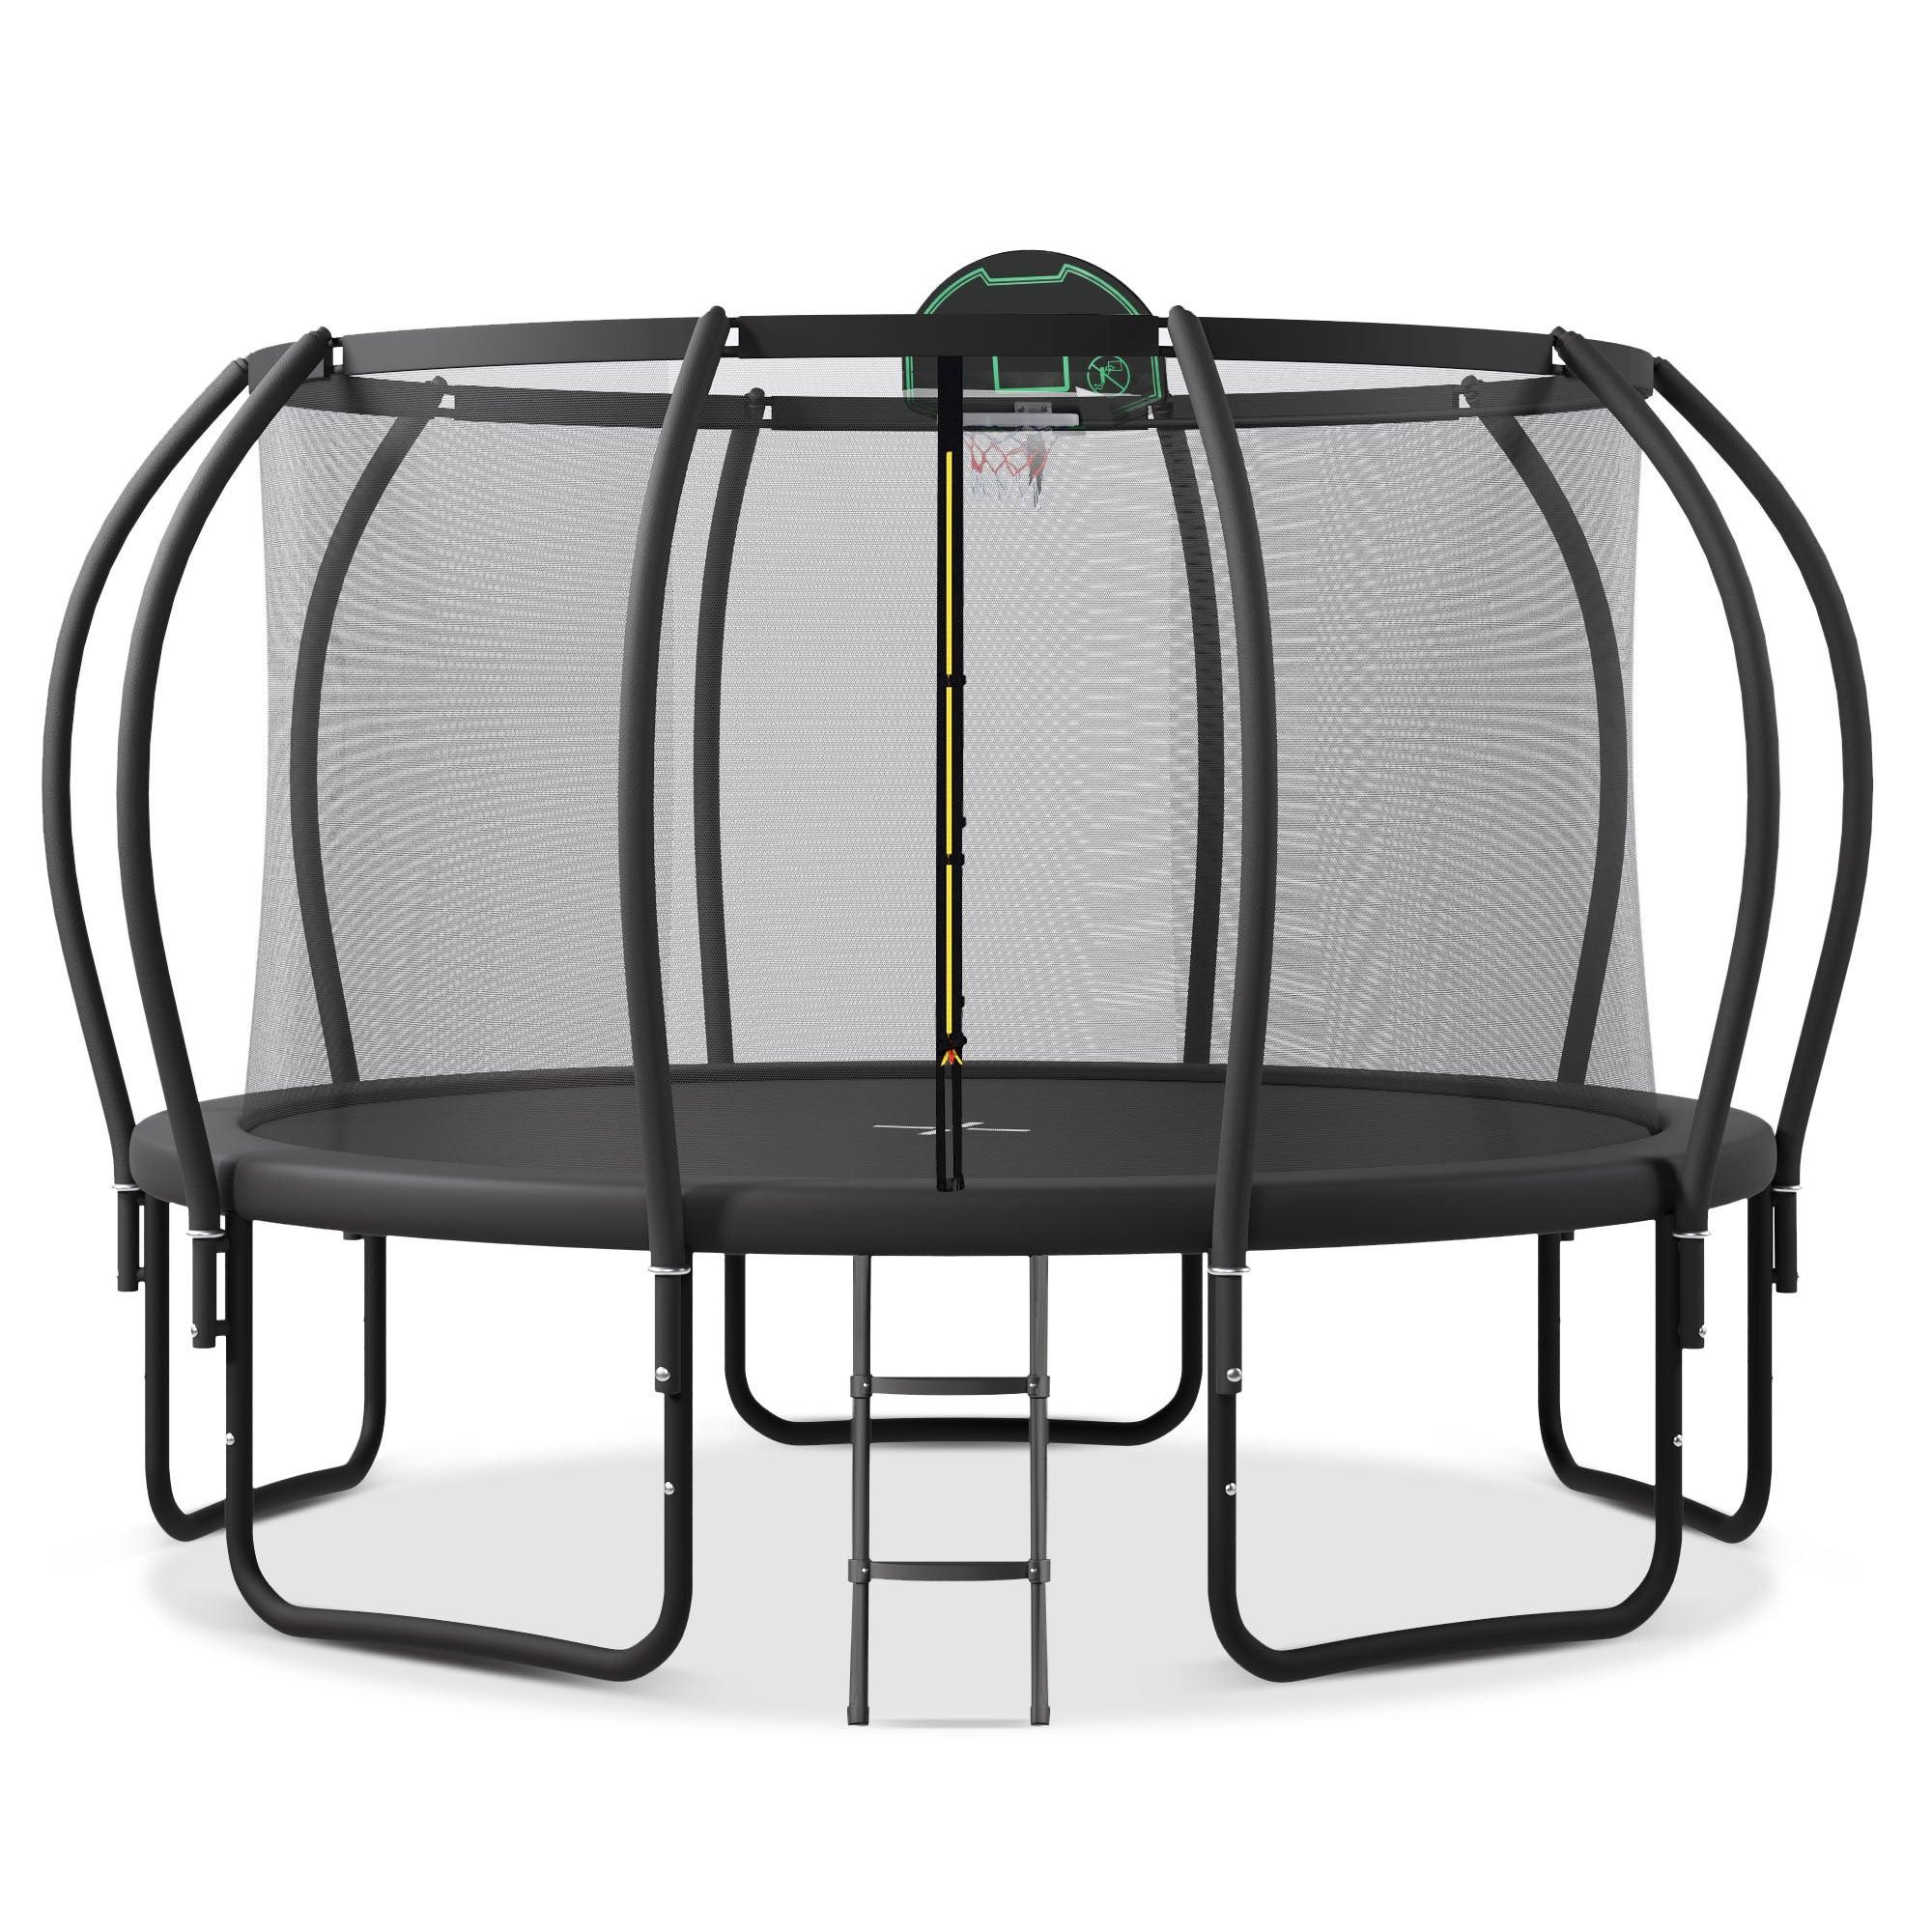 🆓🚛 12FT Trampoline for Kids With Upgraded ArcPole and Composite TopLoop for Safety Enclosure + Basketball Board and 10 Ground Stakes